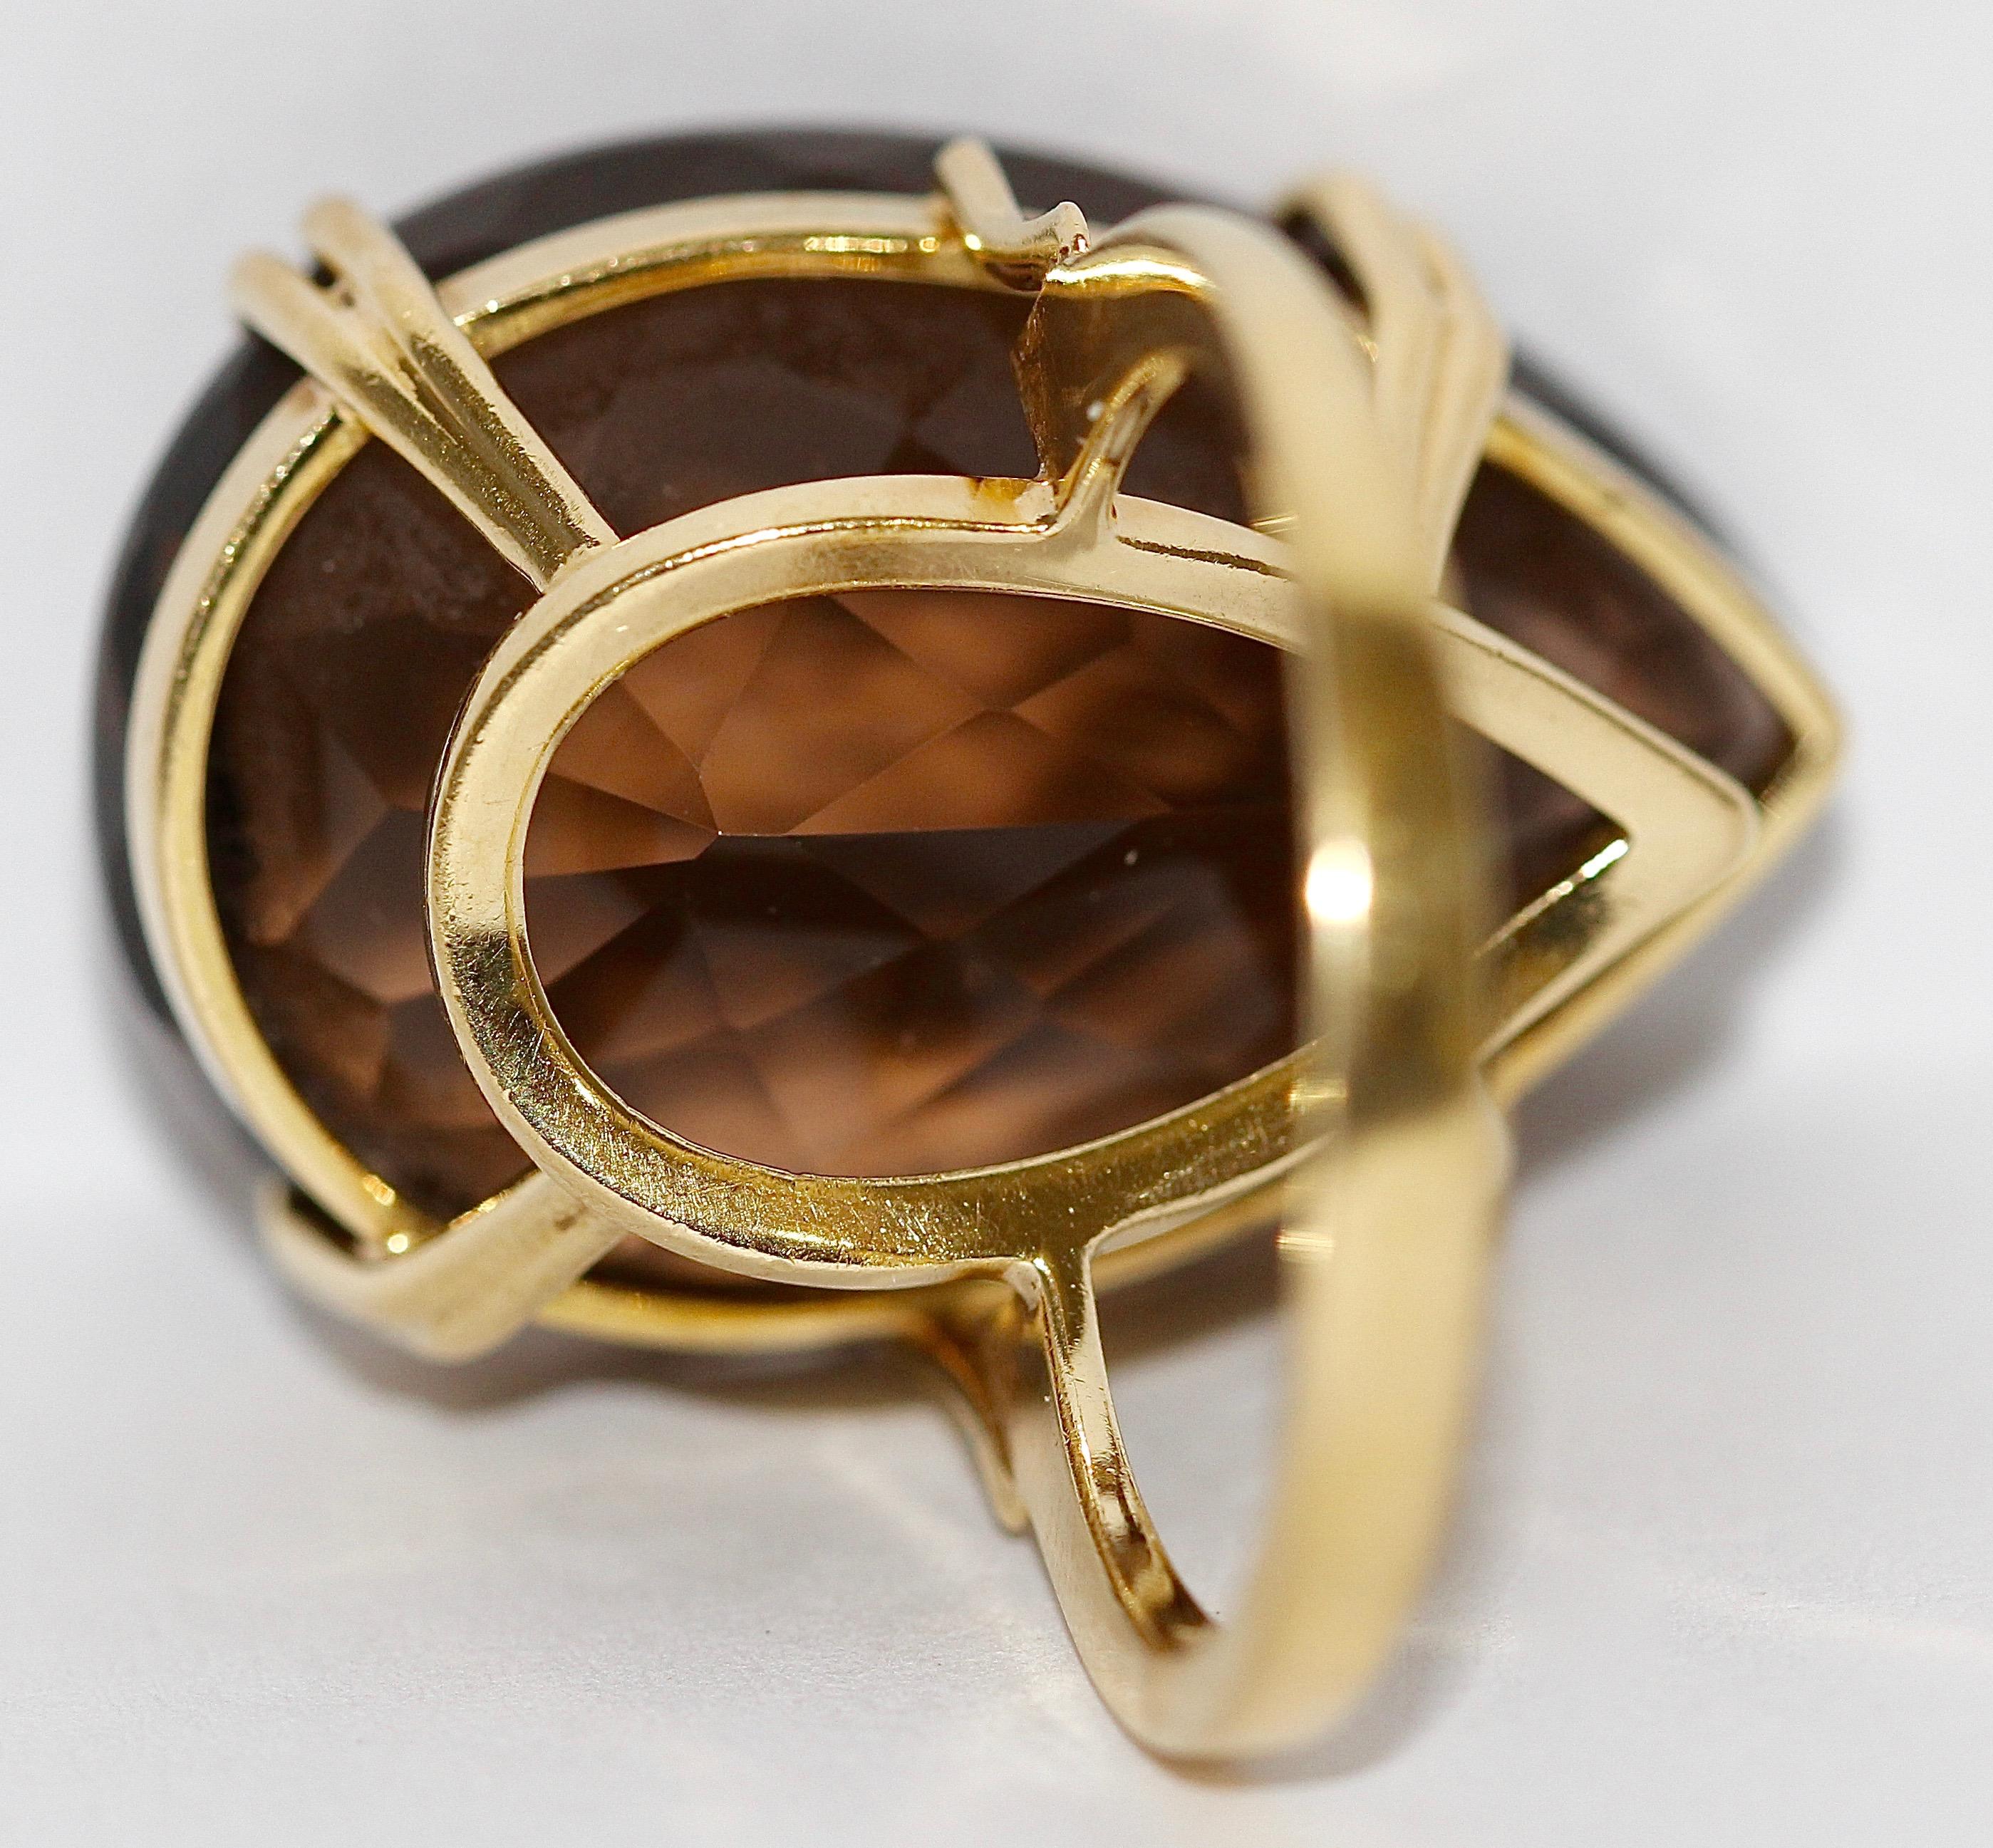 Women's 18 Karat Gold Ring with Large, Faceted Smoky Quartz, Topaz in Heart Shape